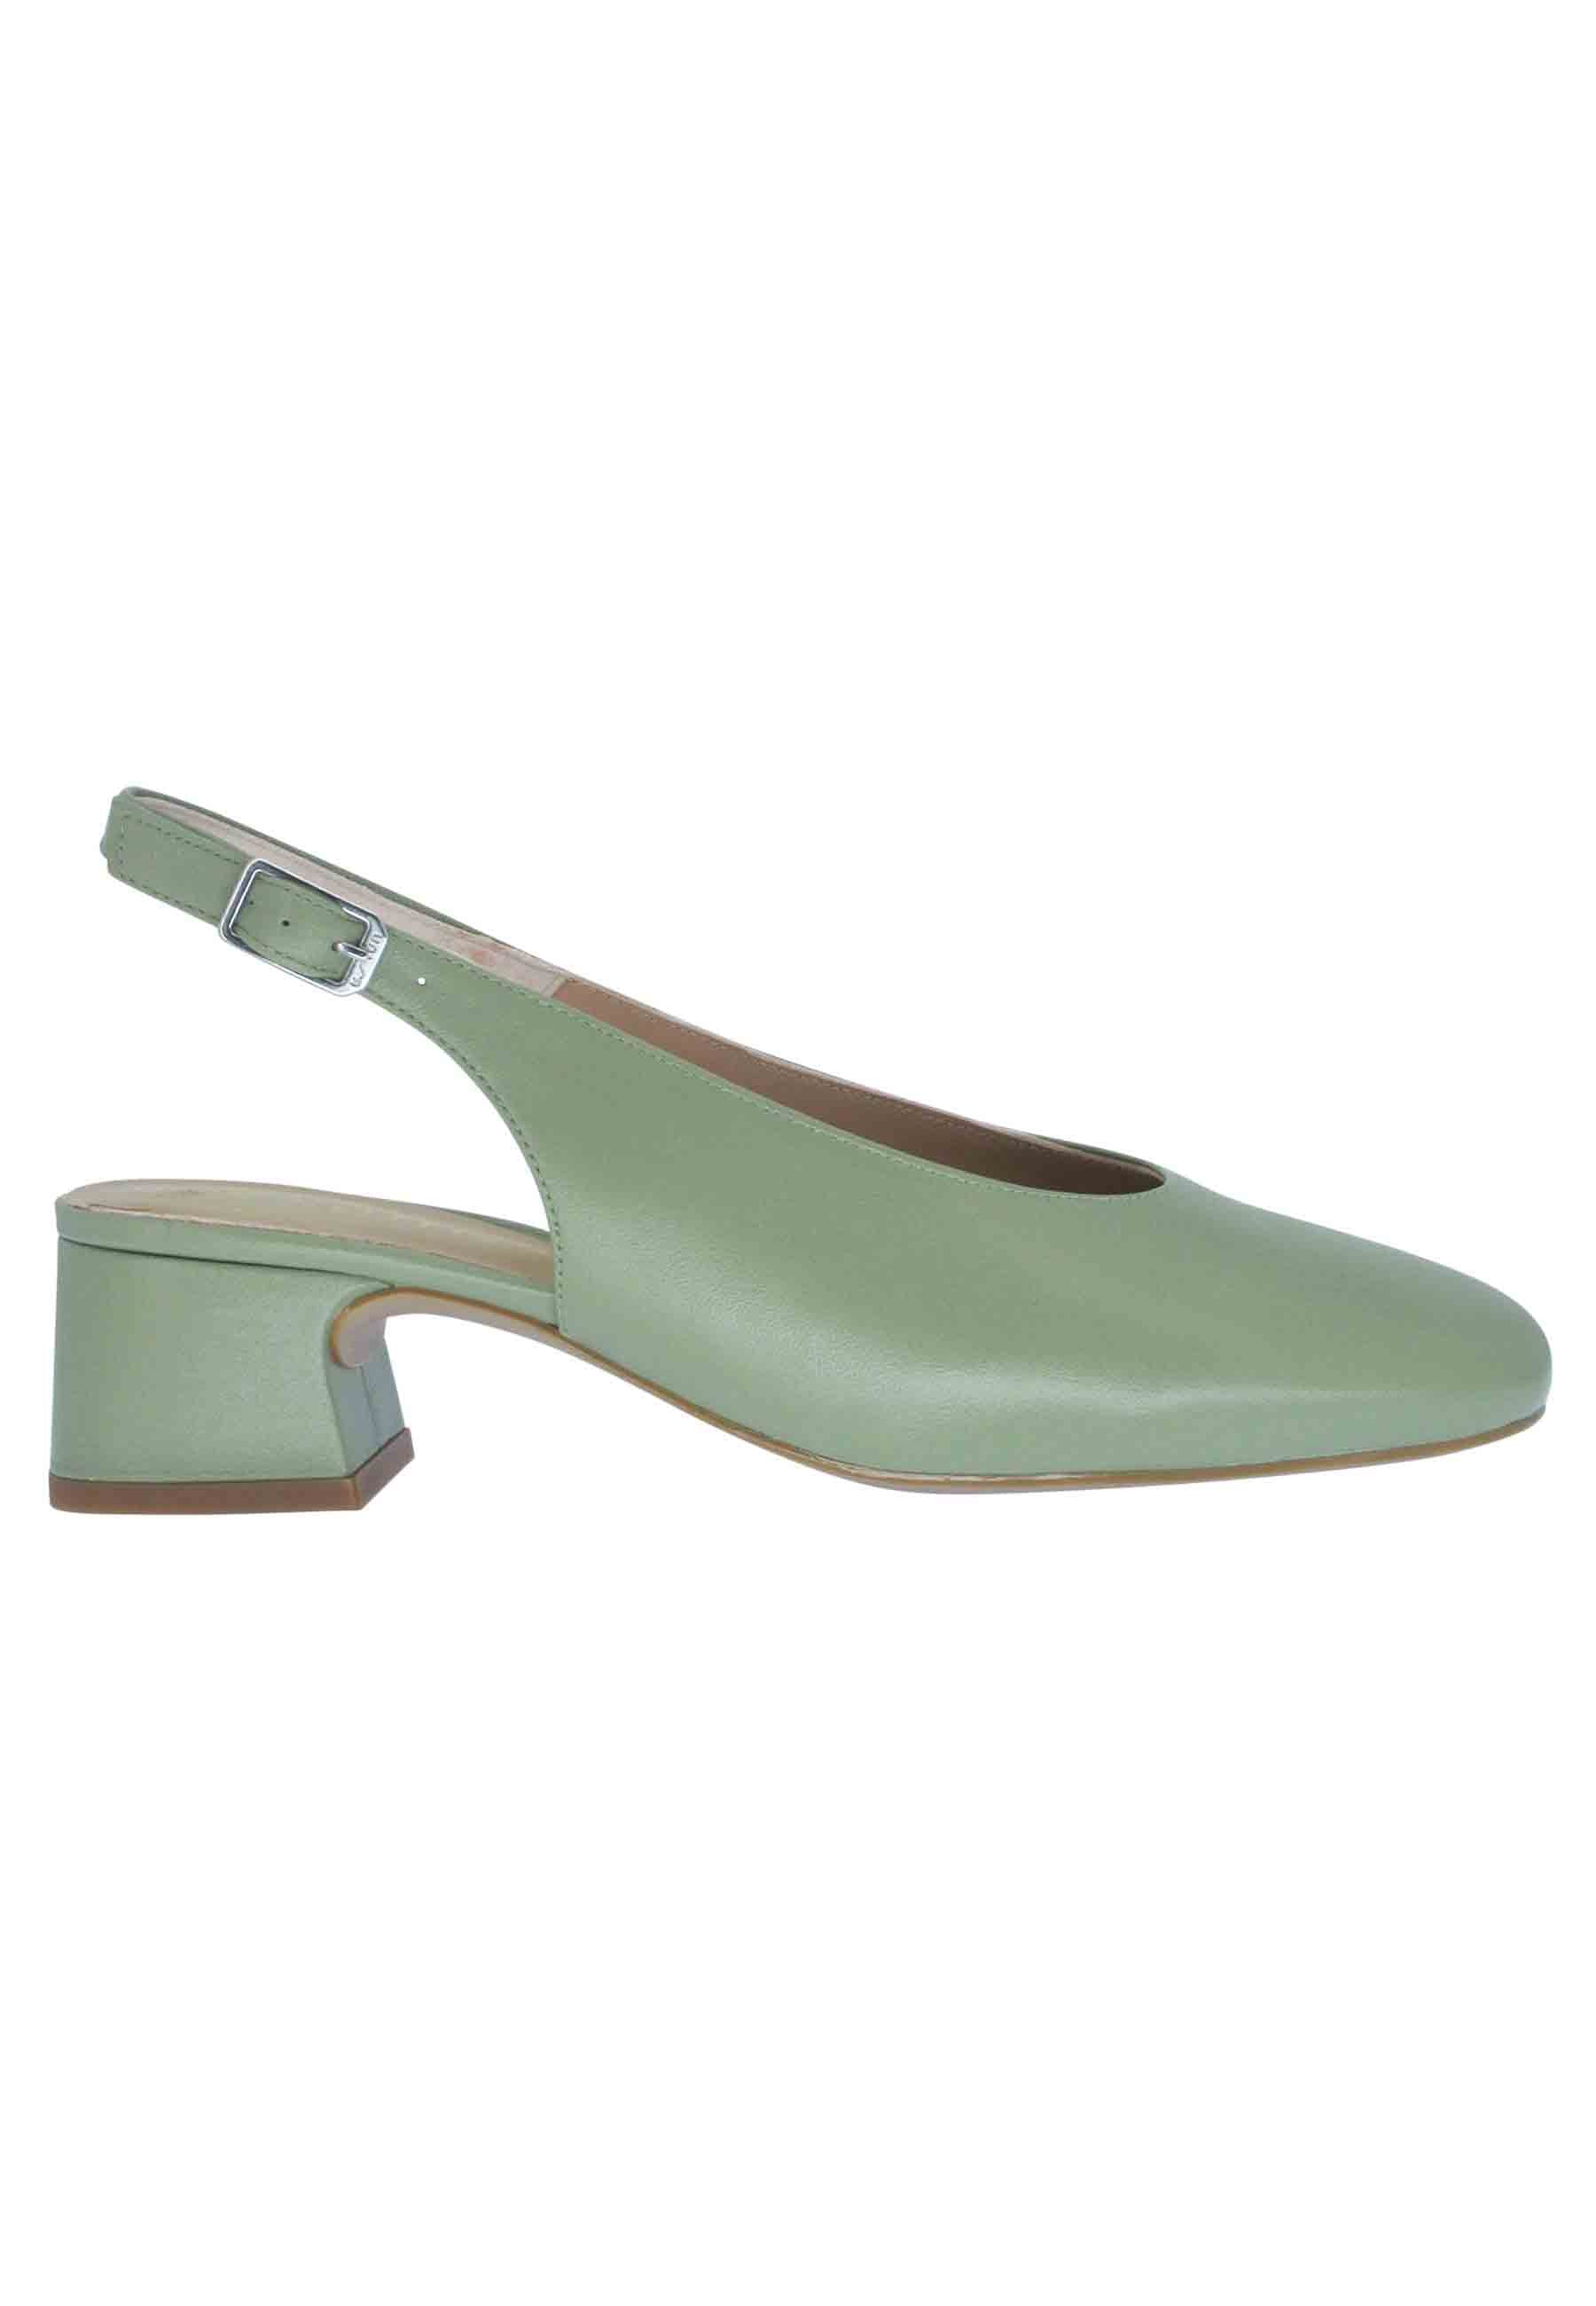 Lavay women's decollete in green leather with square toe and back strap